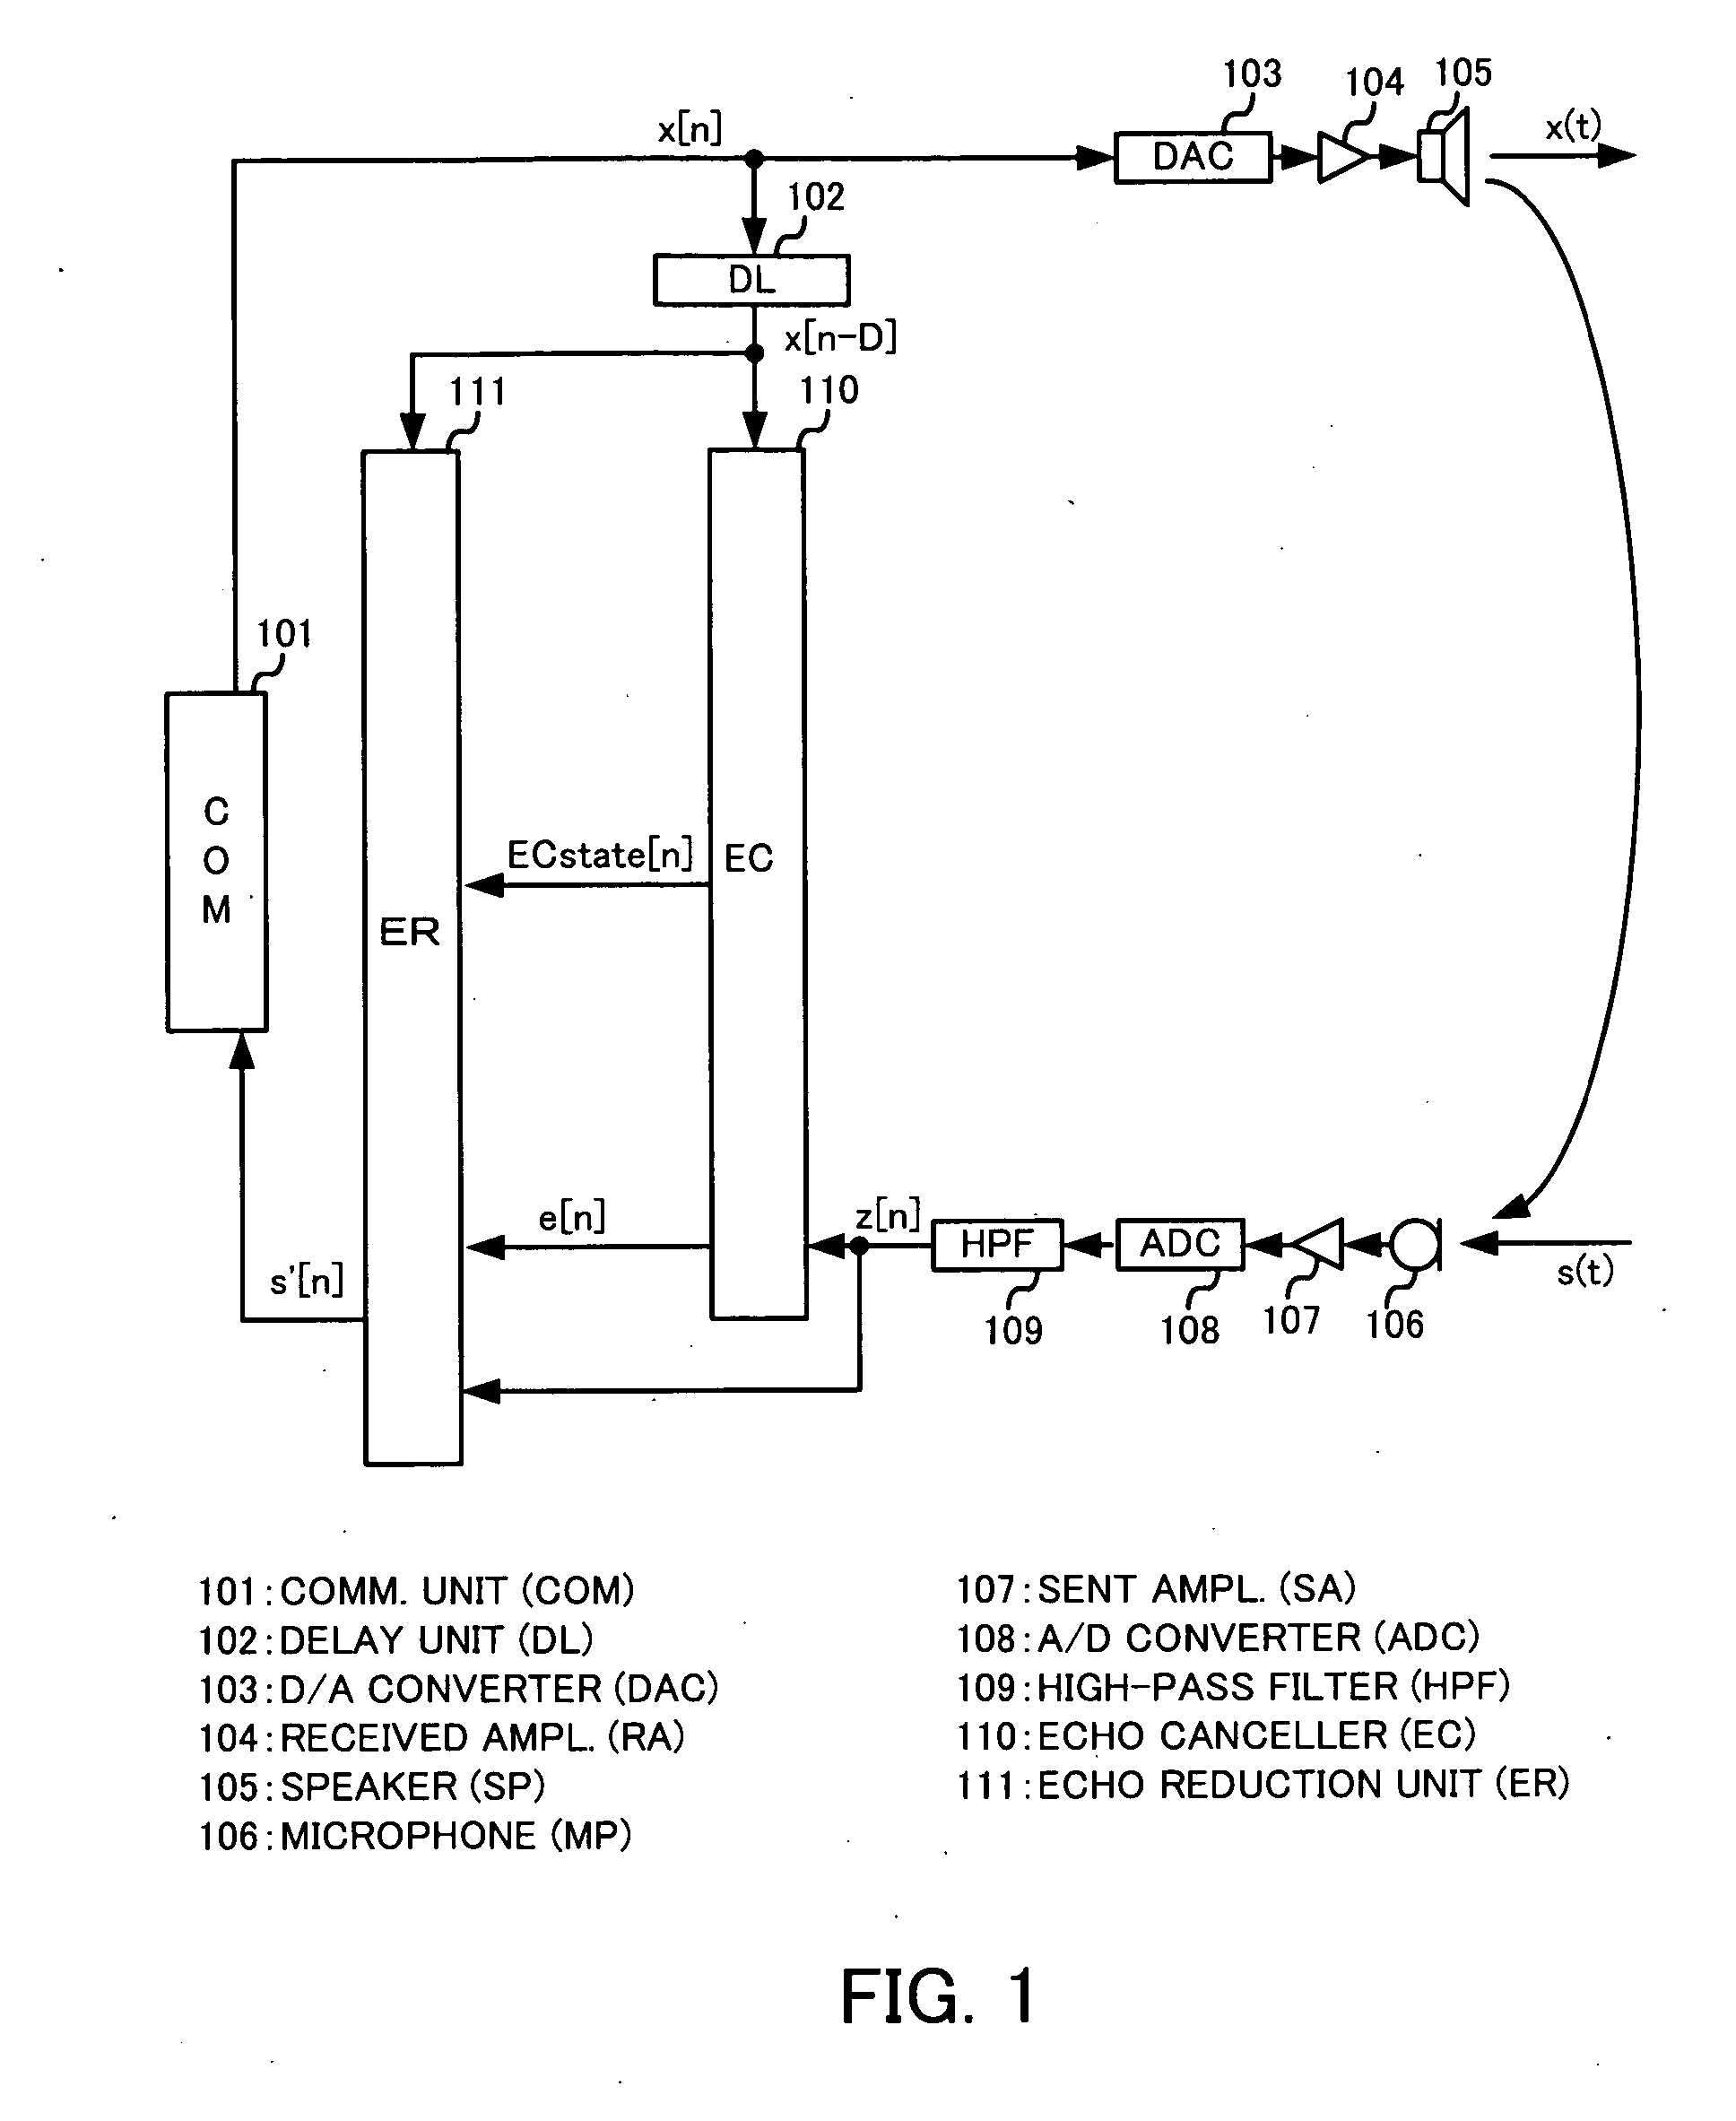 Communication apparatus capable of echo cancellation